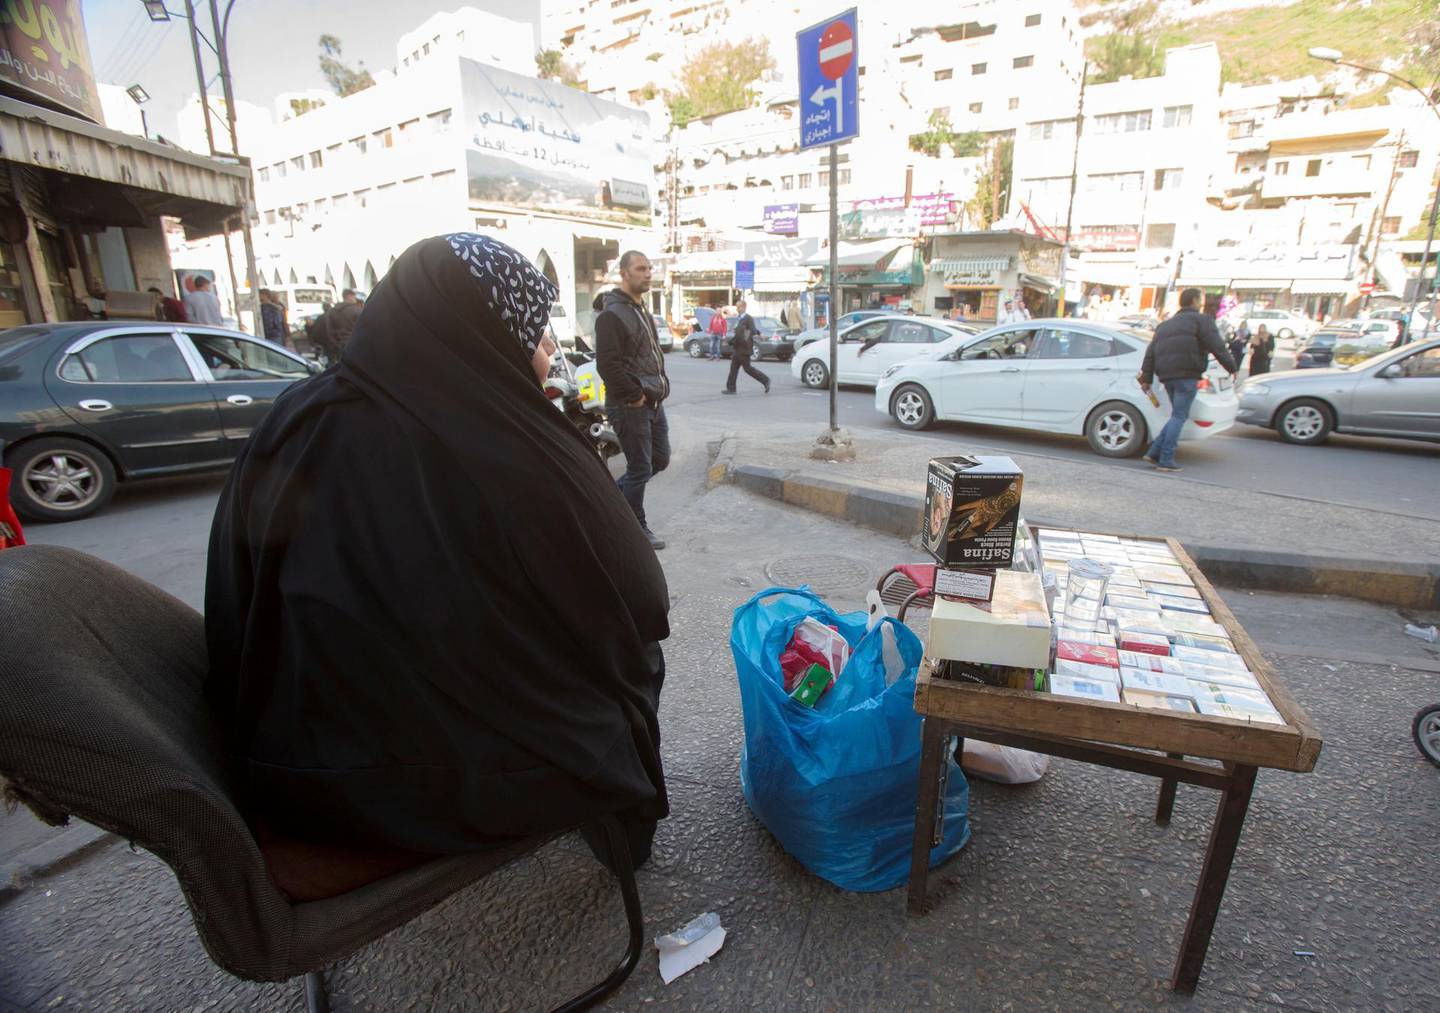 Iraqi refugee Um Saad sits on the sidewalk of a street selling sigarettes for living in the downtown in Amman, Jordan. (Salah Malkawi for The National)